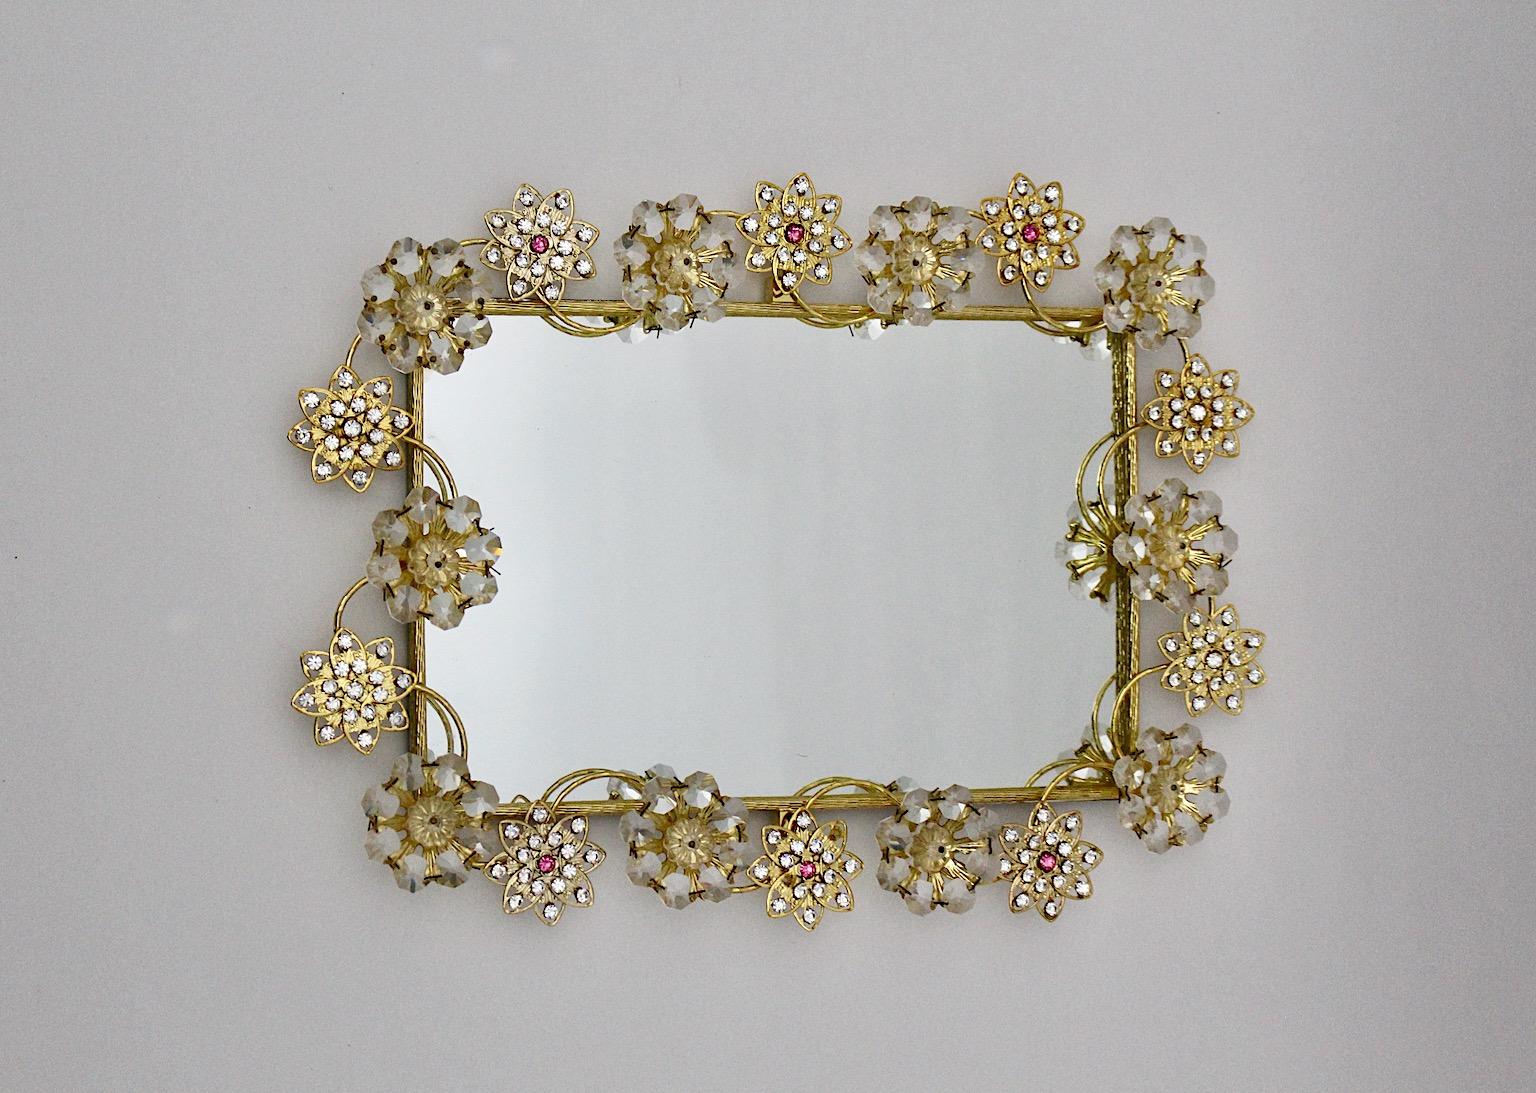 Modern Vintage Rectangular Glass Golden Metal Wall Mirror, 1990s, Italy For Sale 7